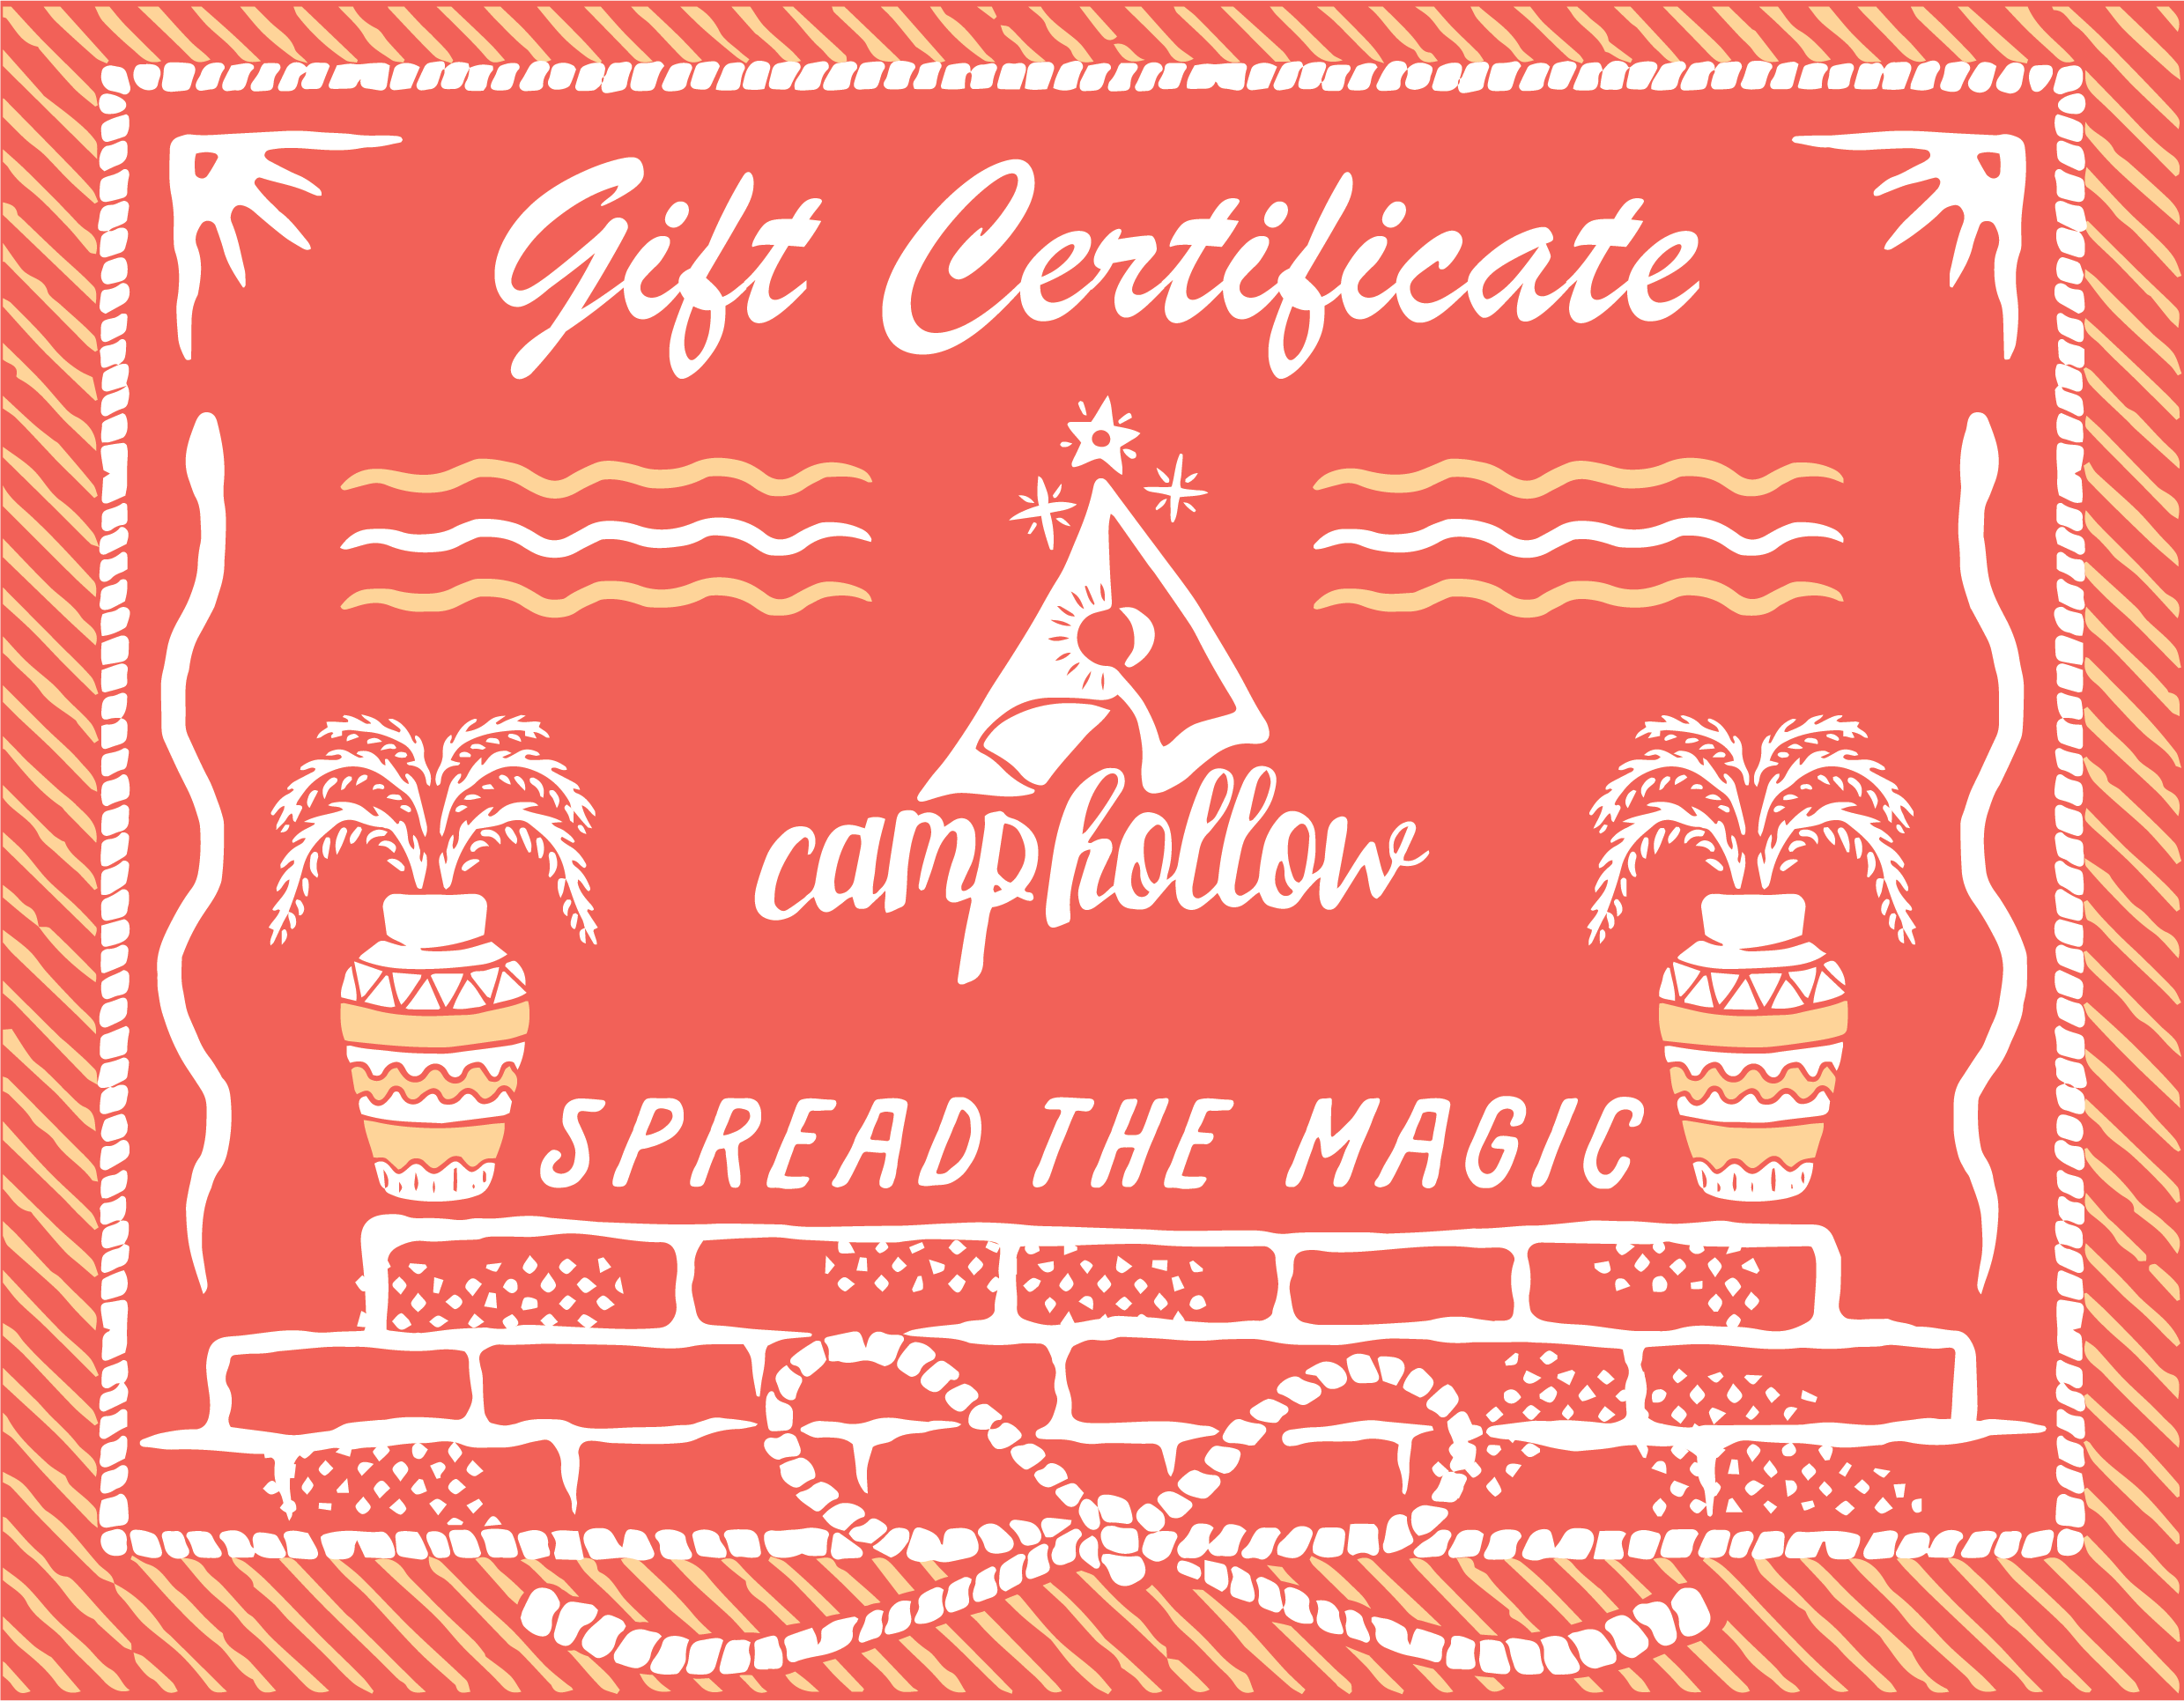 Camp Hollow Gift Certificate -  Camp Hollow